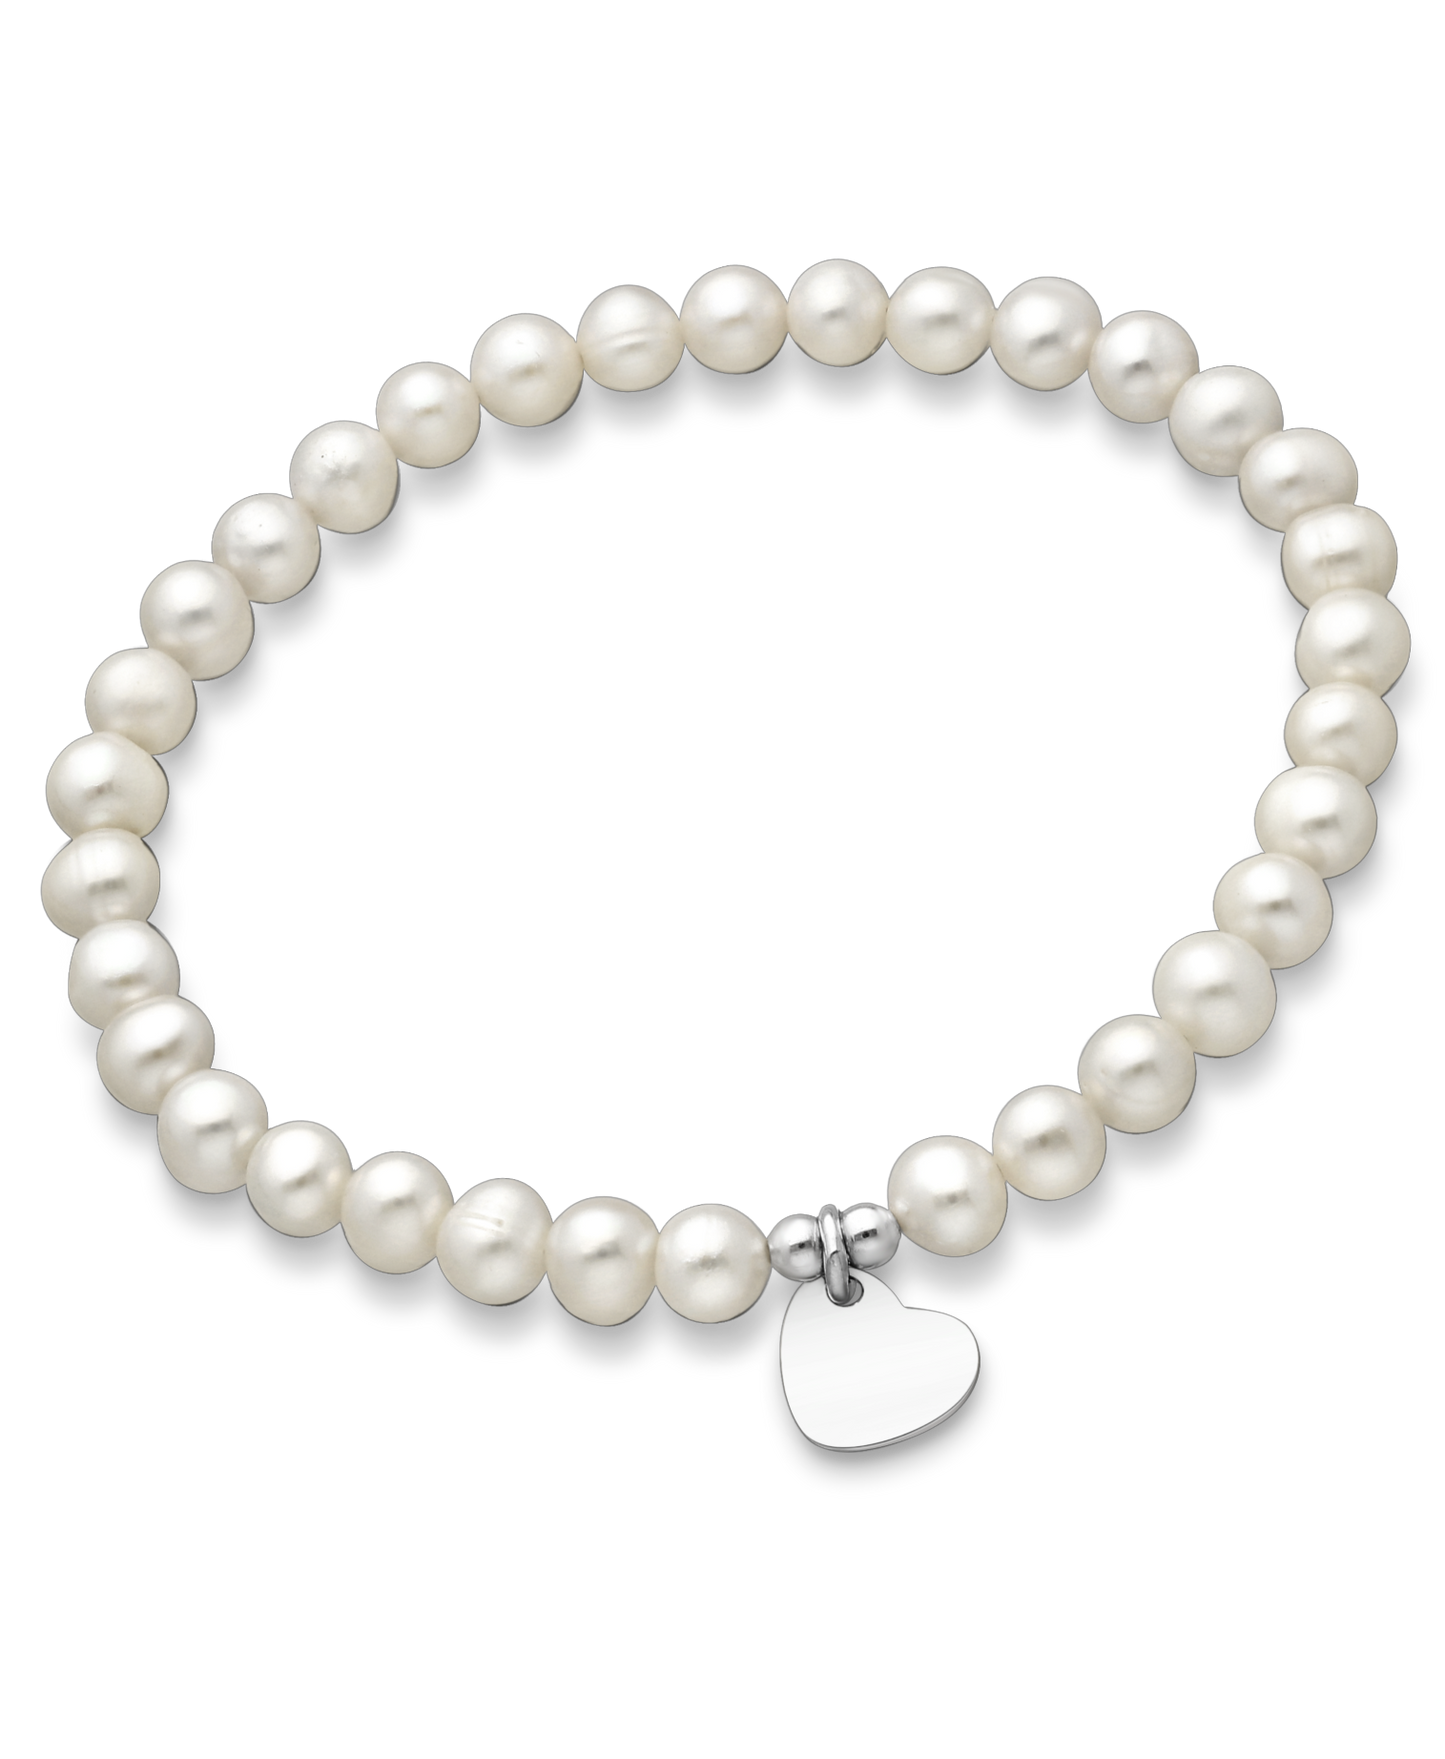 Sparkle By Princess Andre: AA Grade Freshwater Pearls on Elastic Bracelet with Sterling Silver Heart